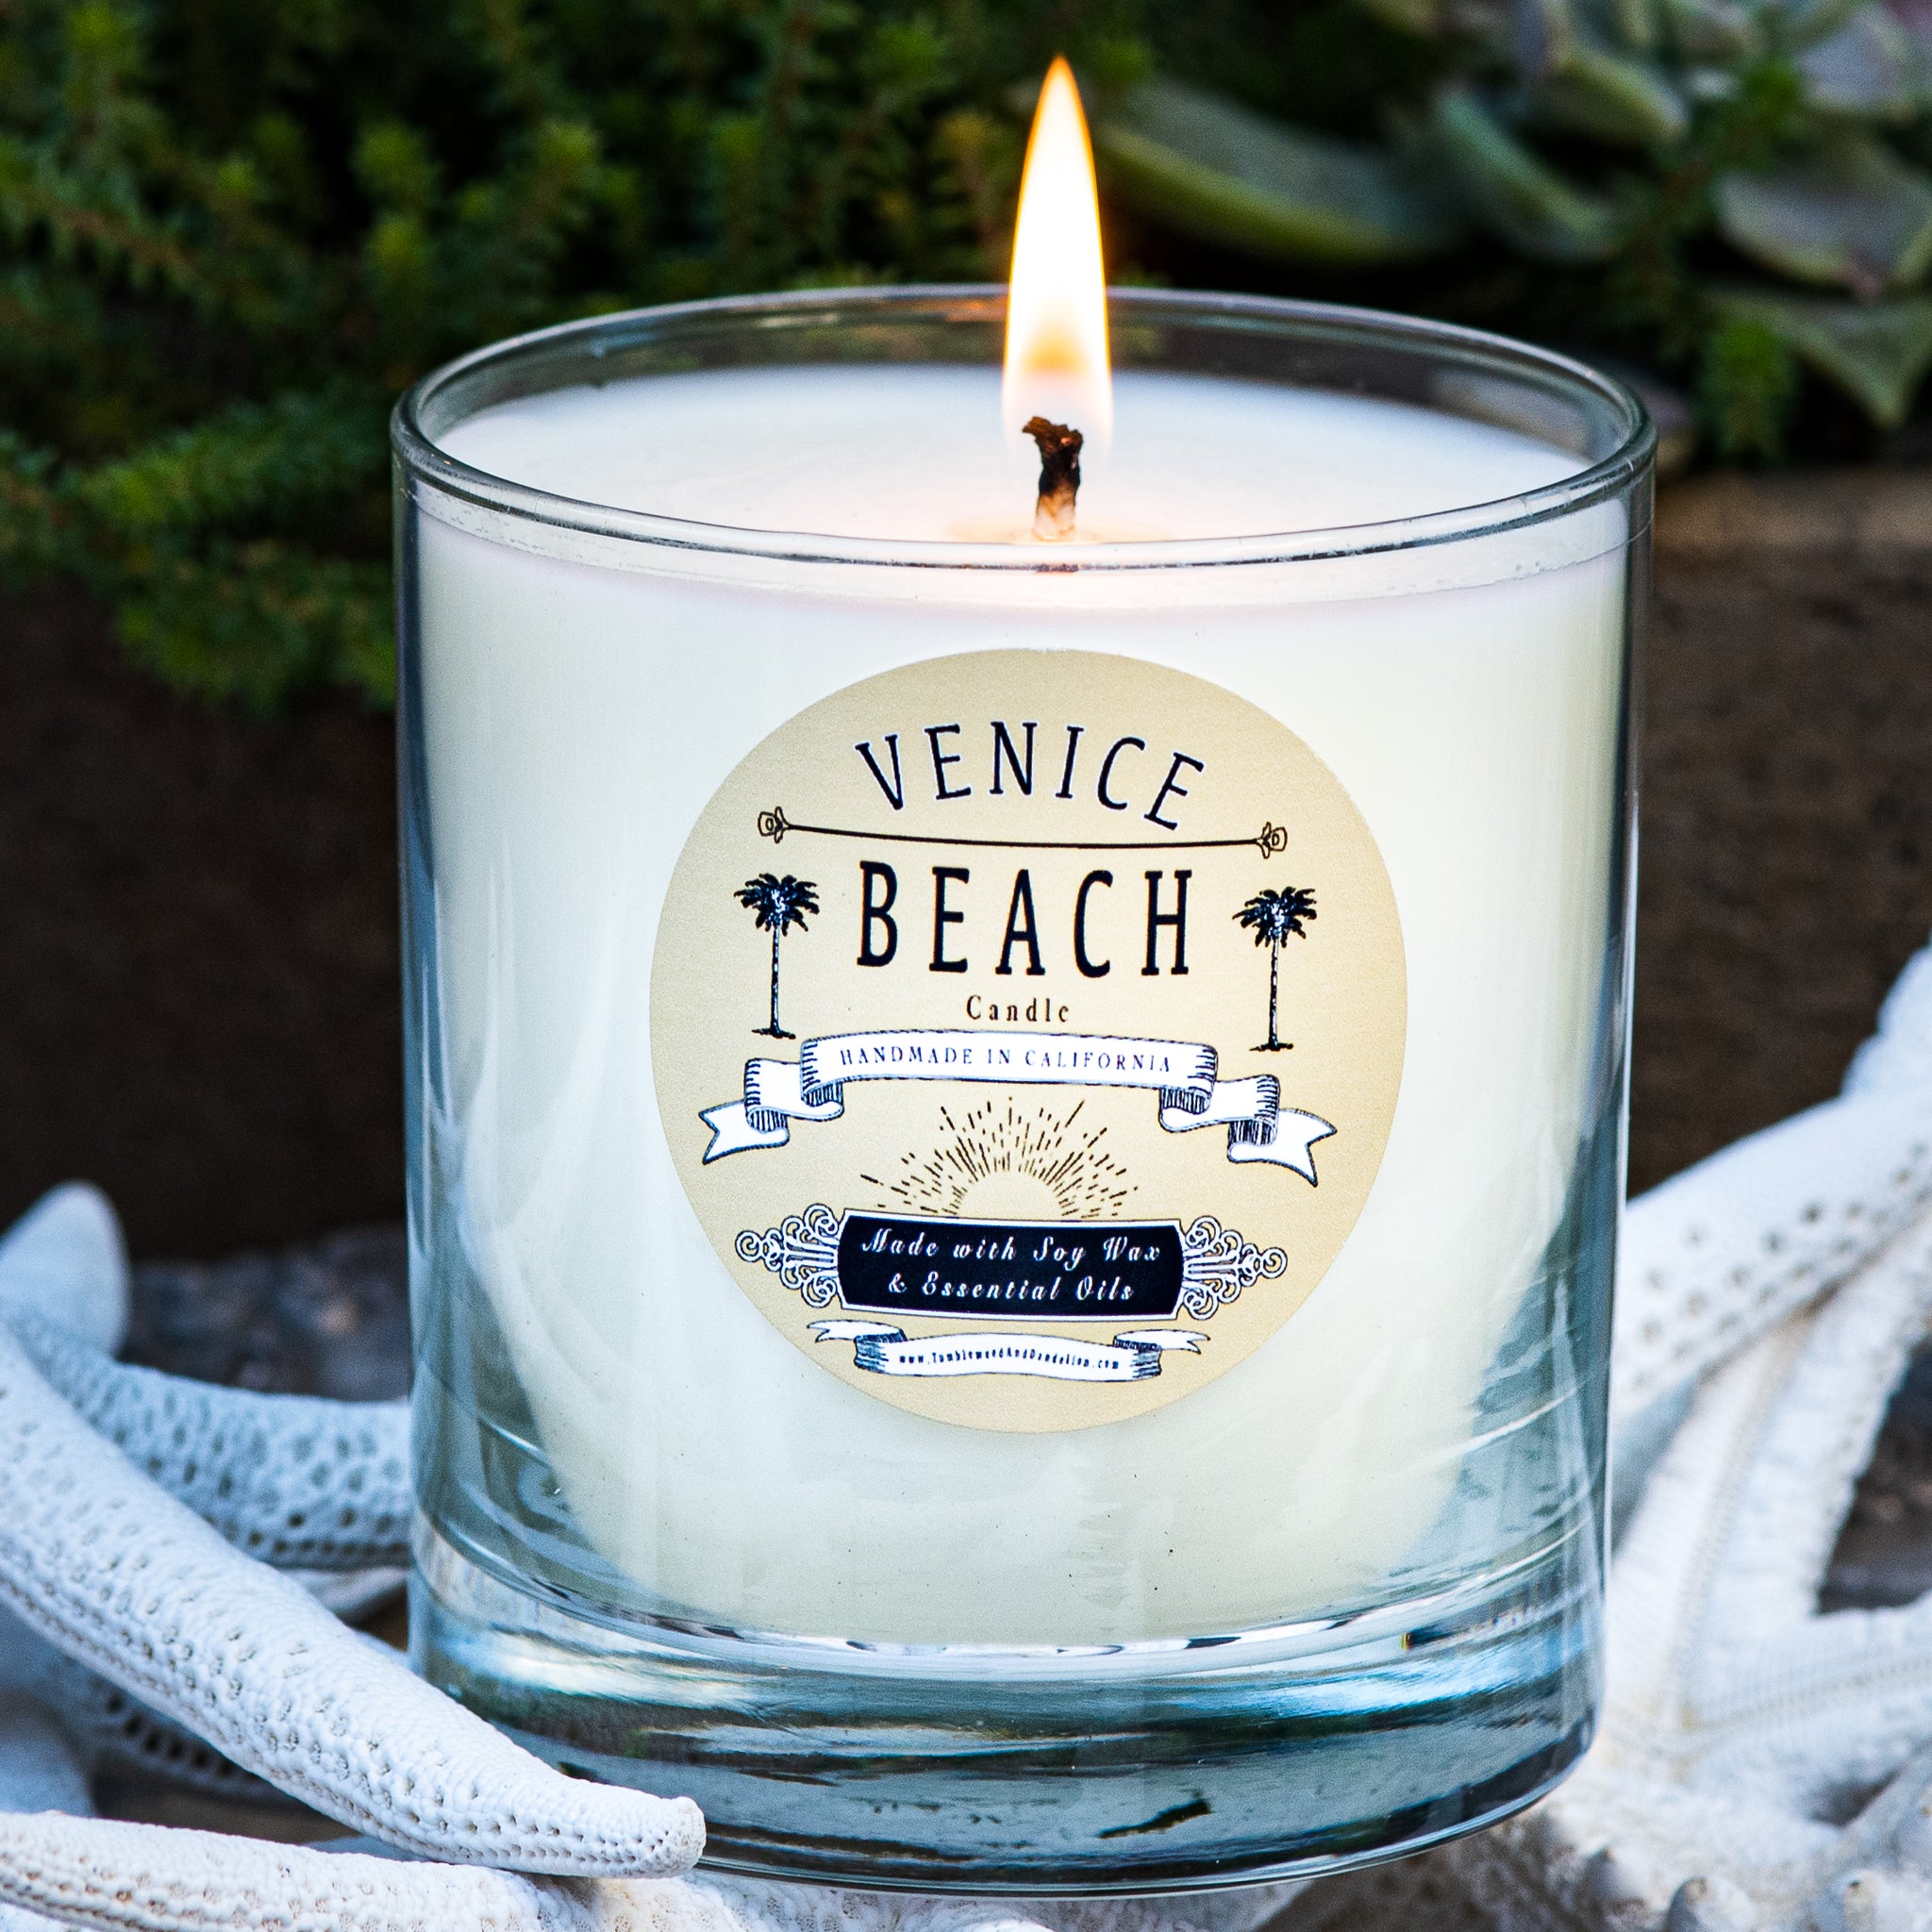 Double Bluff Beach Soy Candle - Elm Design Candles